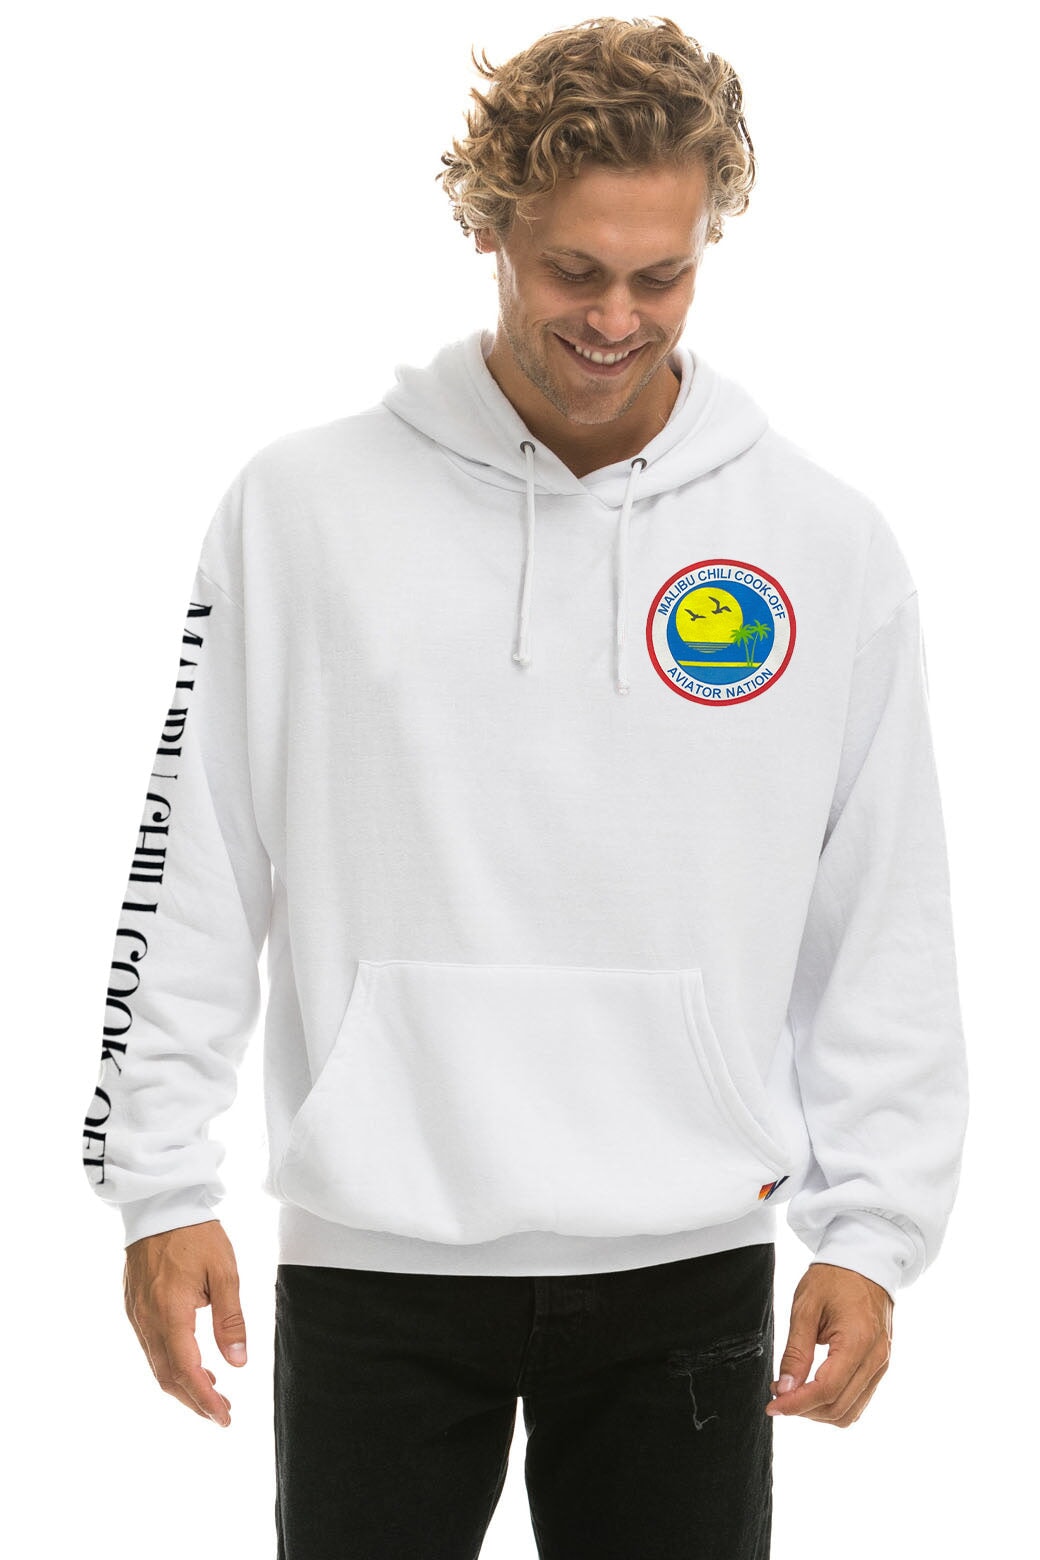 MALIBU CHILI COOK-OFF 2023 PULLOVER HOODIE RELAXED - WHITE Hoodie Aviator Nation 